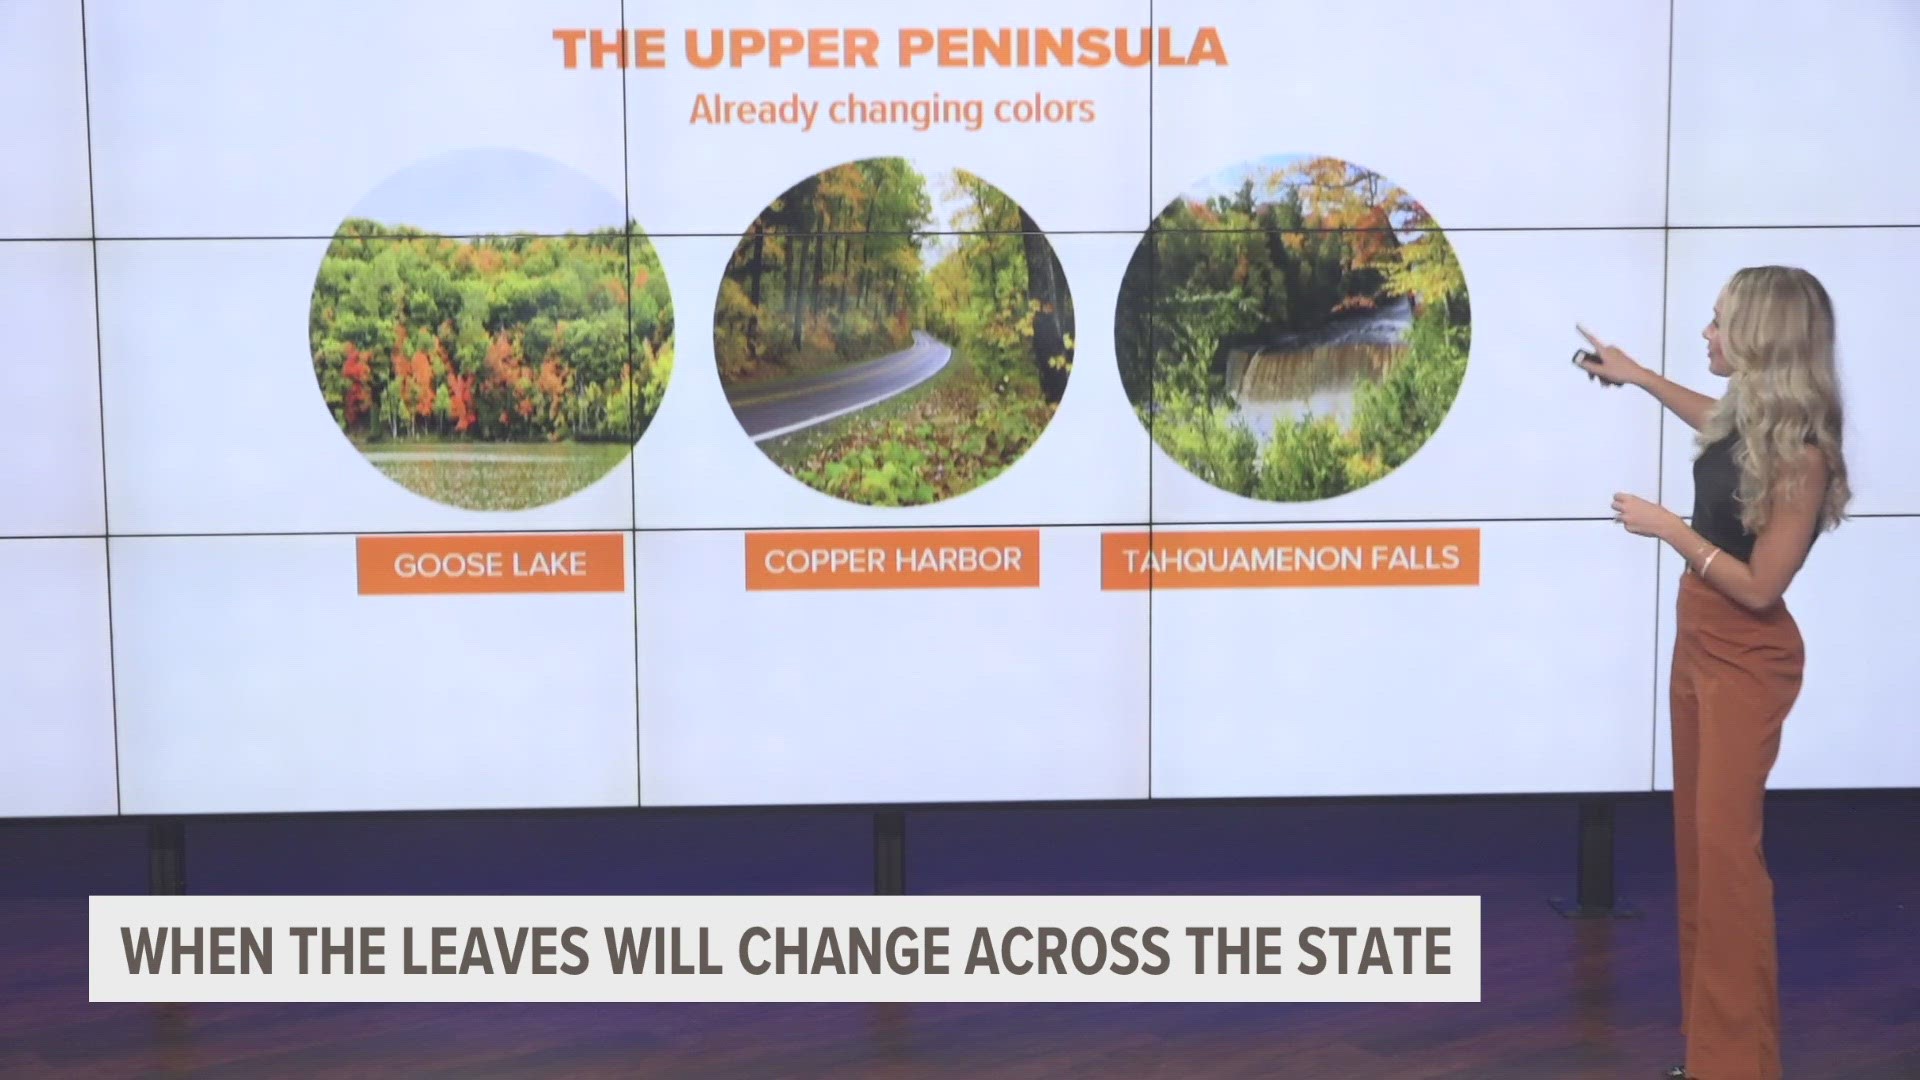 Fall colors are on the horizon and arriving in some places across the state sooner than others.